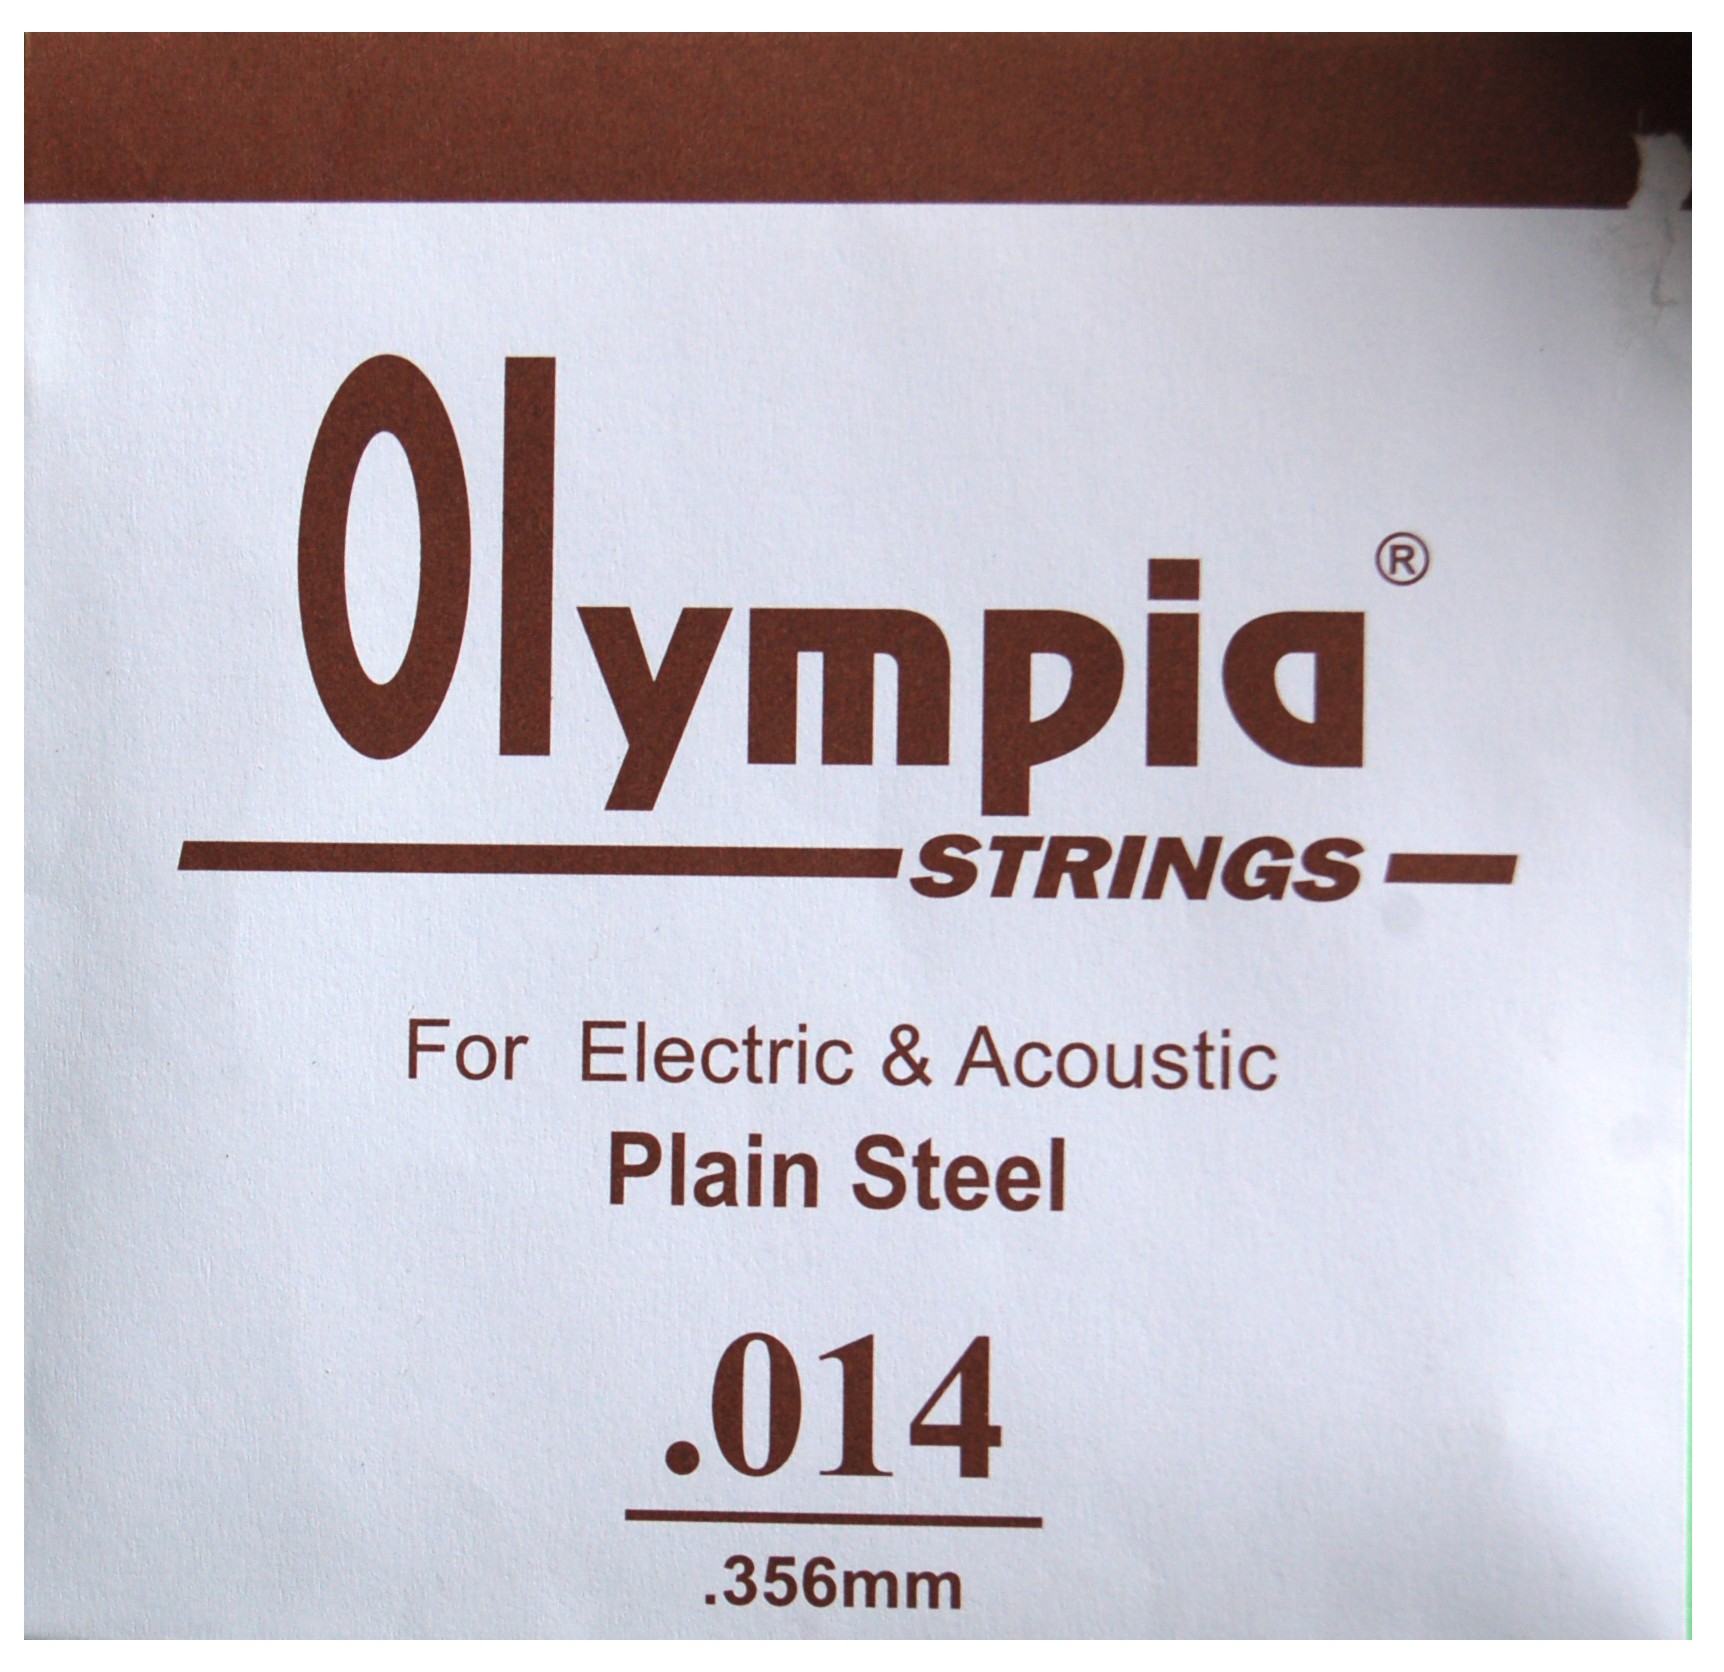 Z/ SINGLE .014 - 1 STRINGS ACOUSTIC or ELECTRIC